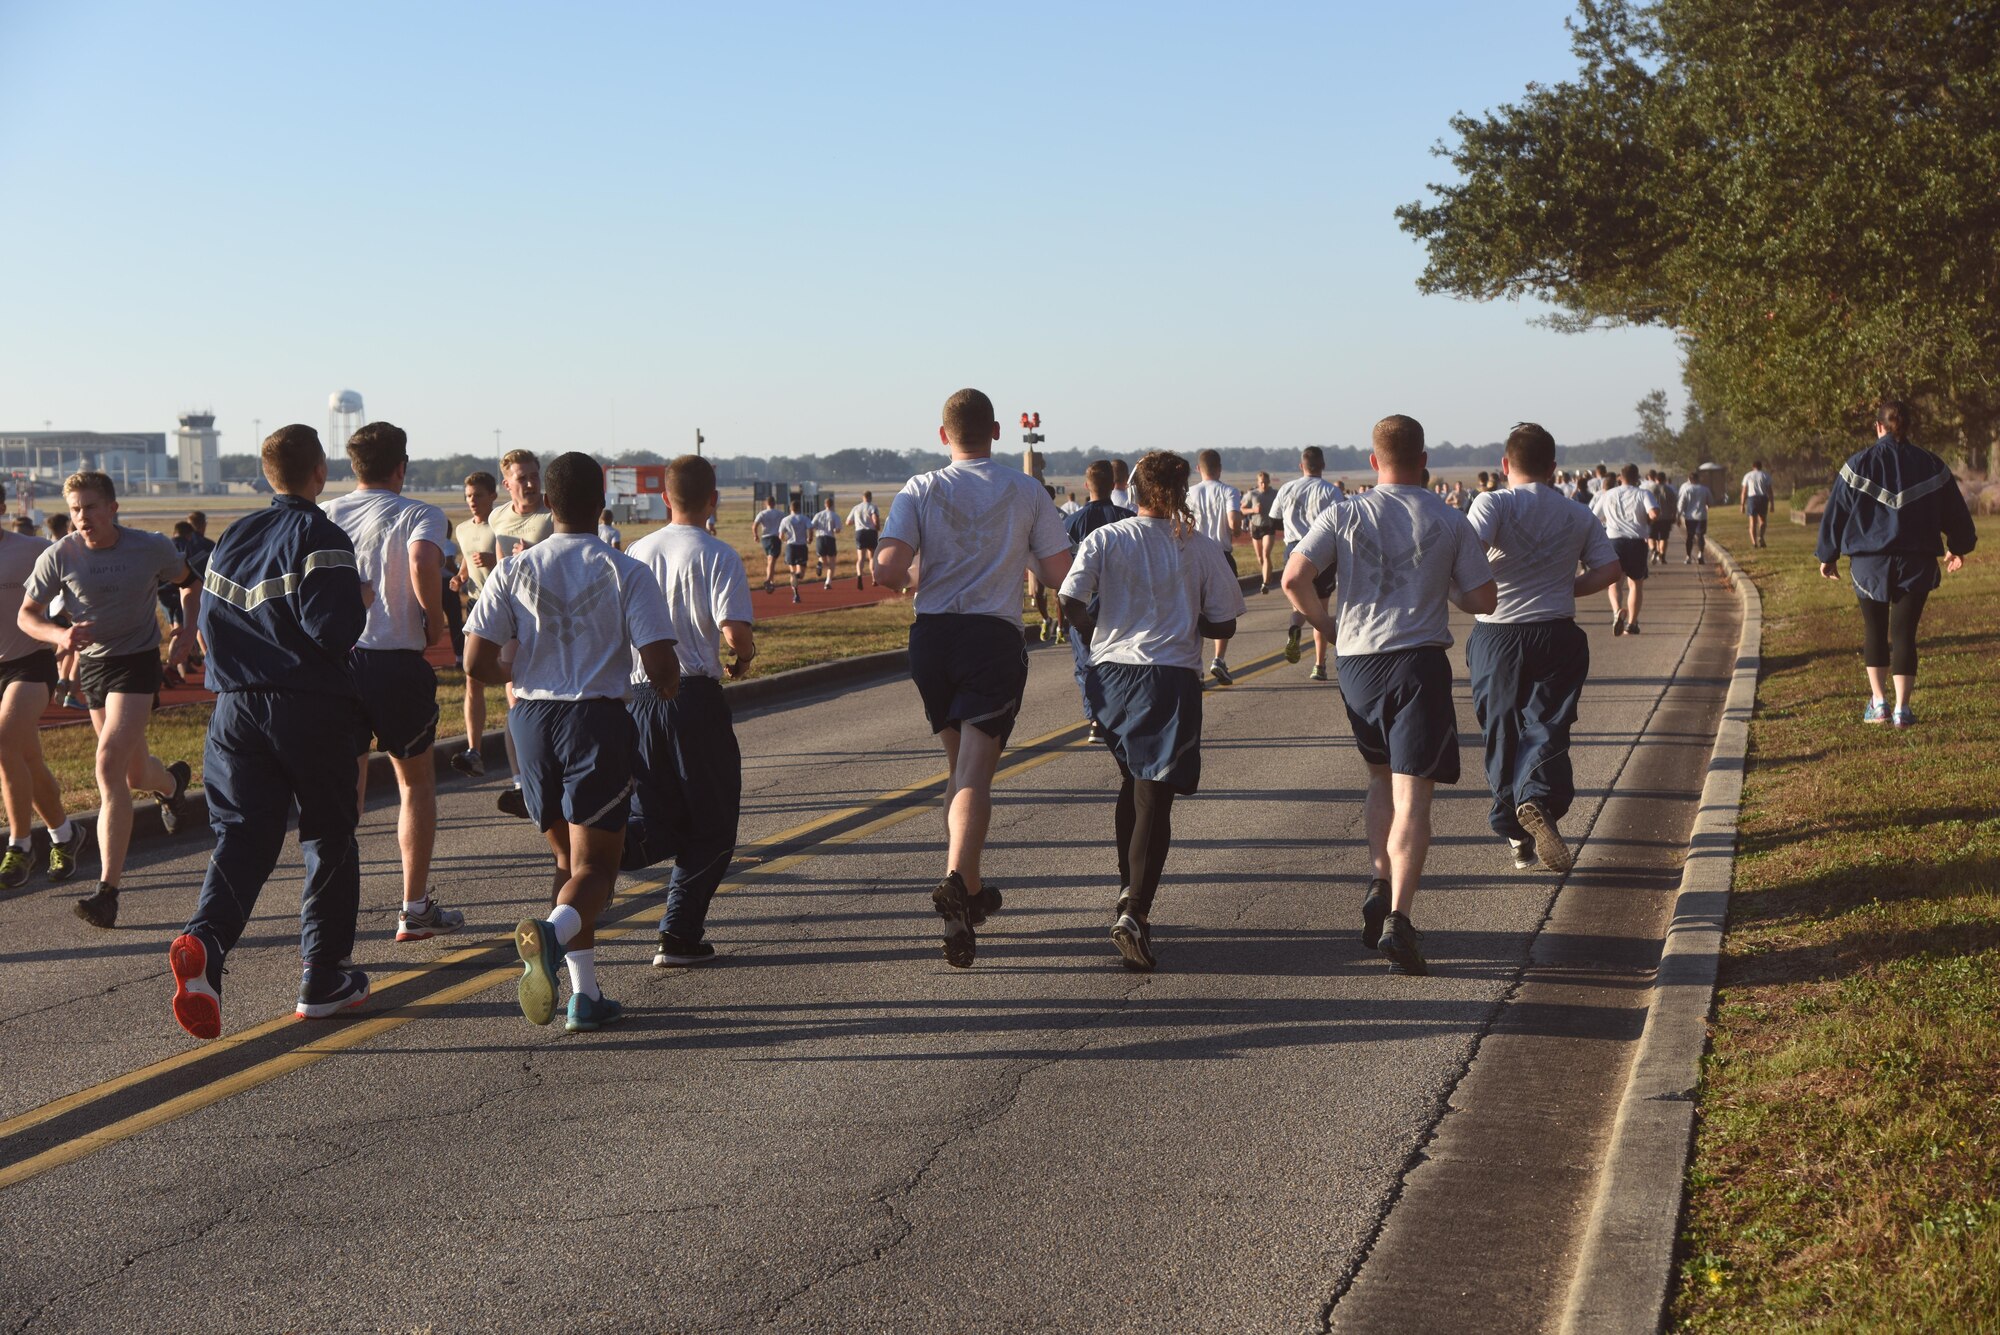 Keesler personnel participate in an 81st Training Wing color run Nov. 17, 2016, on Keesler Air Force Base, Miss. The run was one of several events held throughout Dragon Week, which focuses on resiliency and teambuilding initiatives across the base. (U.S. Air Force photo by Kemberly Groue/Released)